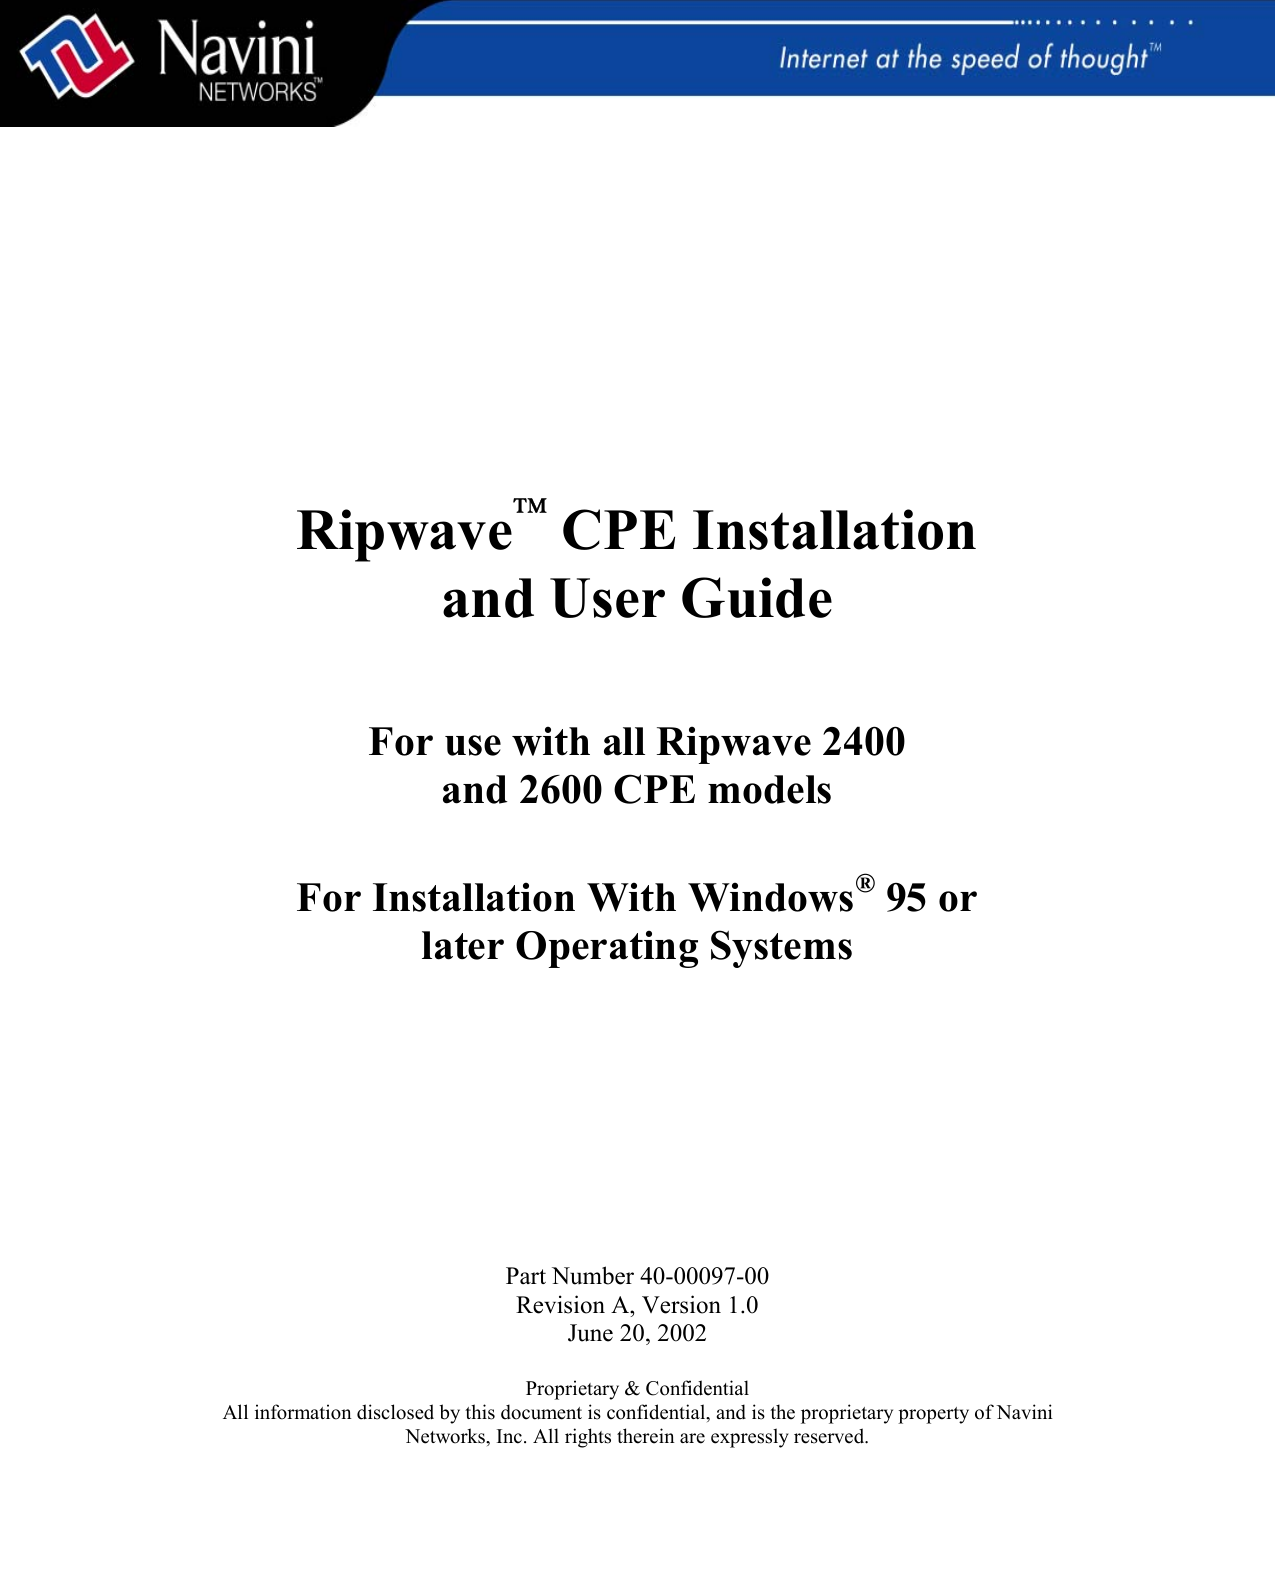       RipwaveÔ CPE Installation and User Guide    For use with all Ripwave 2400 and 2600 CPE models   For Installation With Windows® 95 or later Operating Systems           Part Number 40-00097-00 Revision A, Version 1.0 June 20, 2002  Proprietary &amp; Confidential All information disclosed by this document is confidential, and is the proprietary property of Navini Networks, Inc. All rights therein are expressly reserved.    